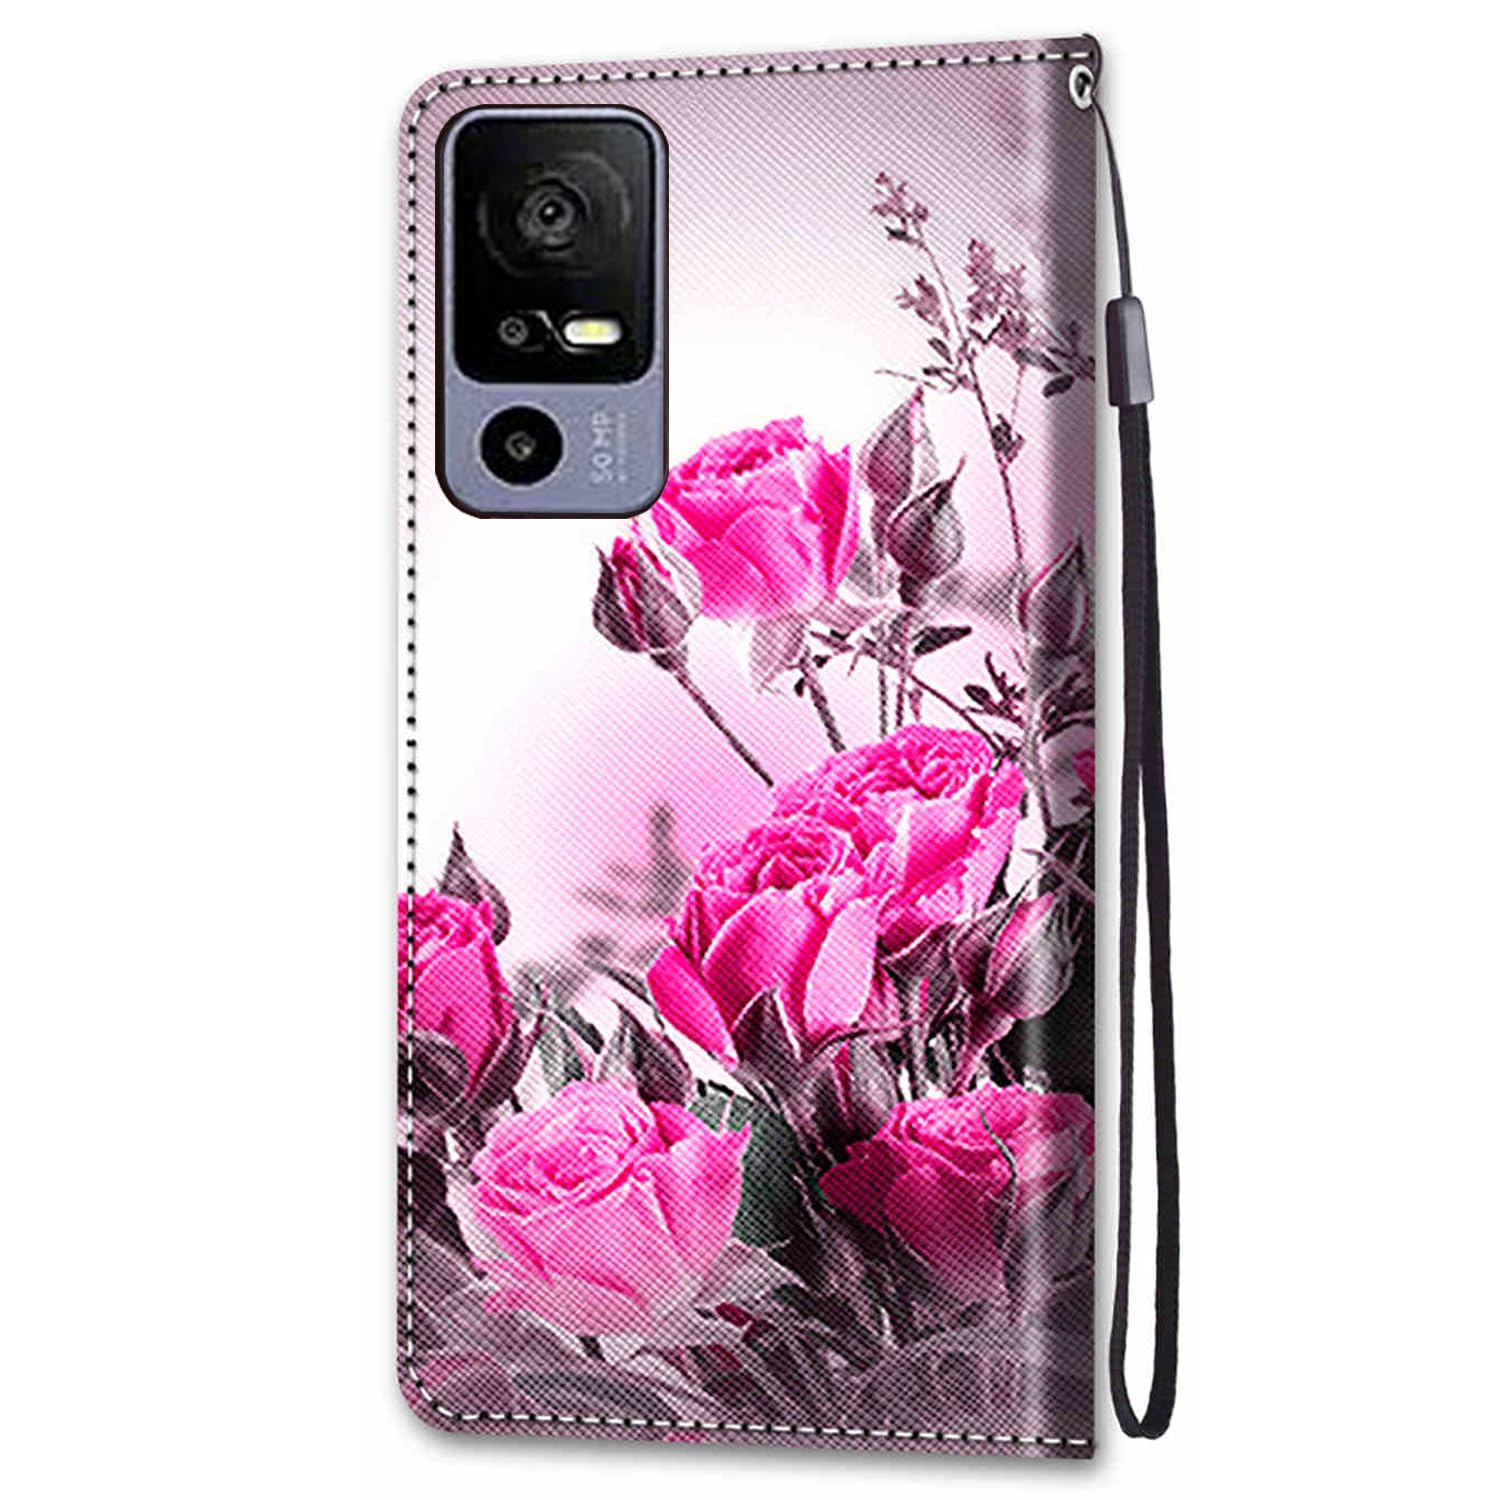 Ranyi for TCL 40 XE 5G Case, TCL 40 X 5G Case, Floral Flower Leather Wallet Case with Credit Card Holder Kickstand Strap Flip Folio Magnetic Wallet Case for TCL 40 XE 40 XE 5G T609DL /TCL 40 X 40X 5G